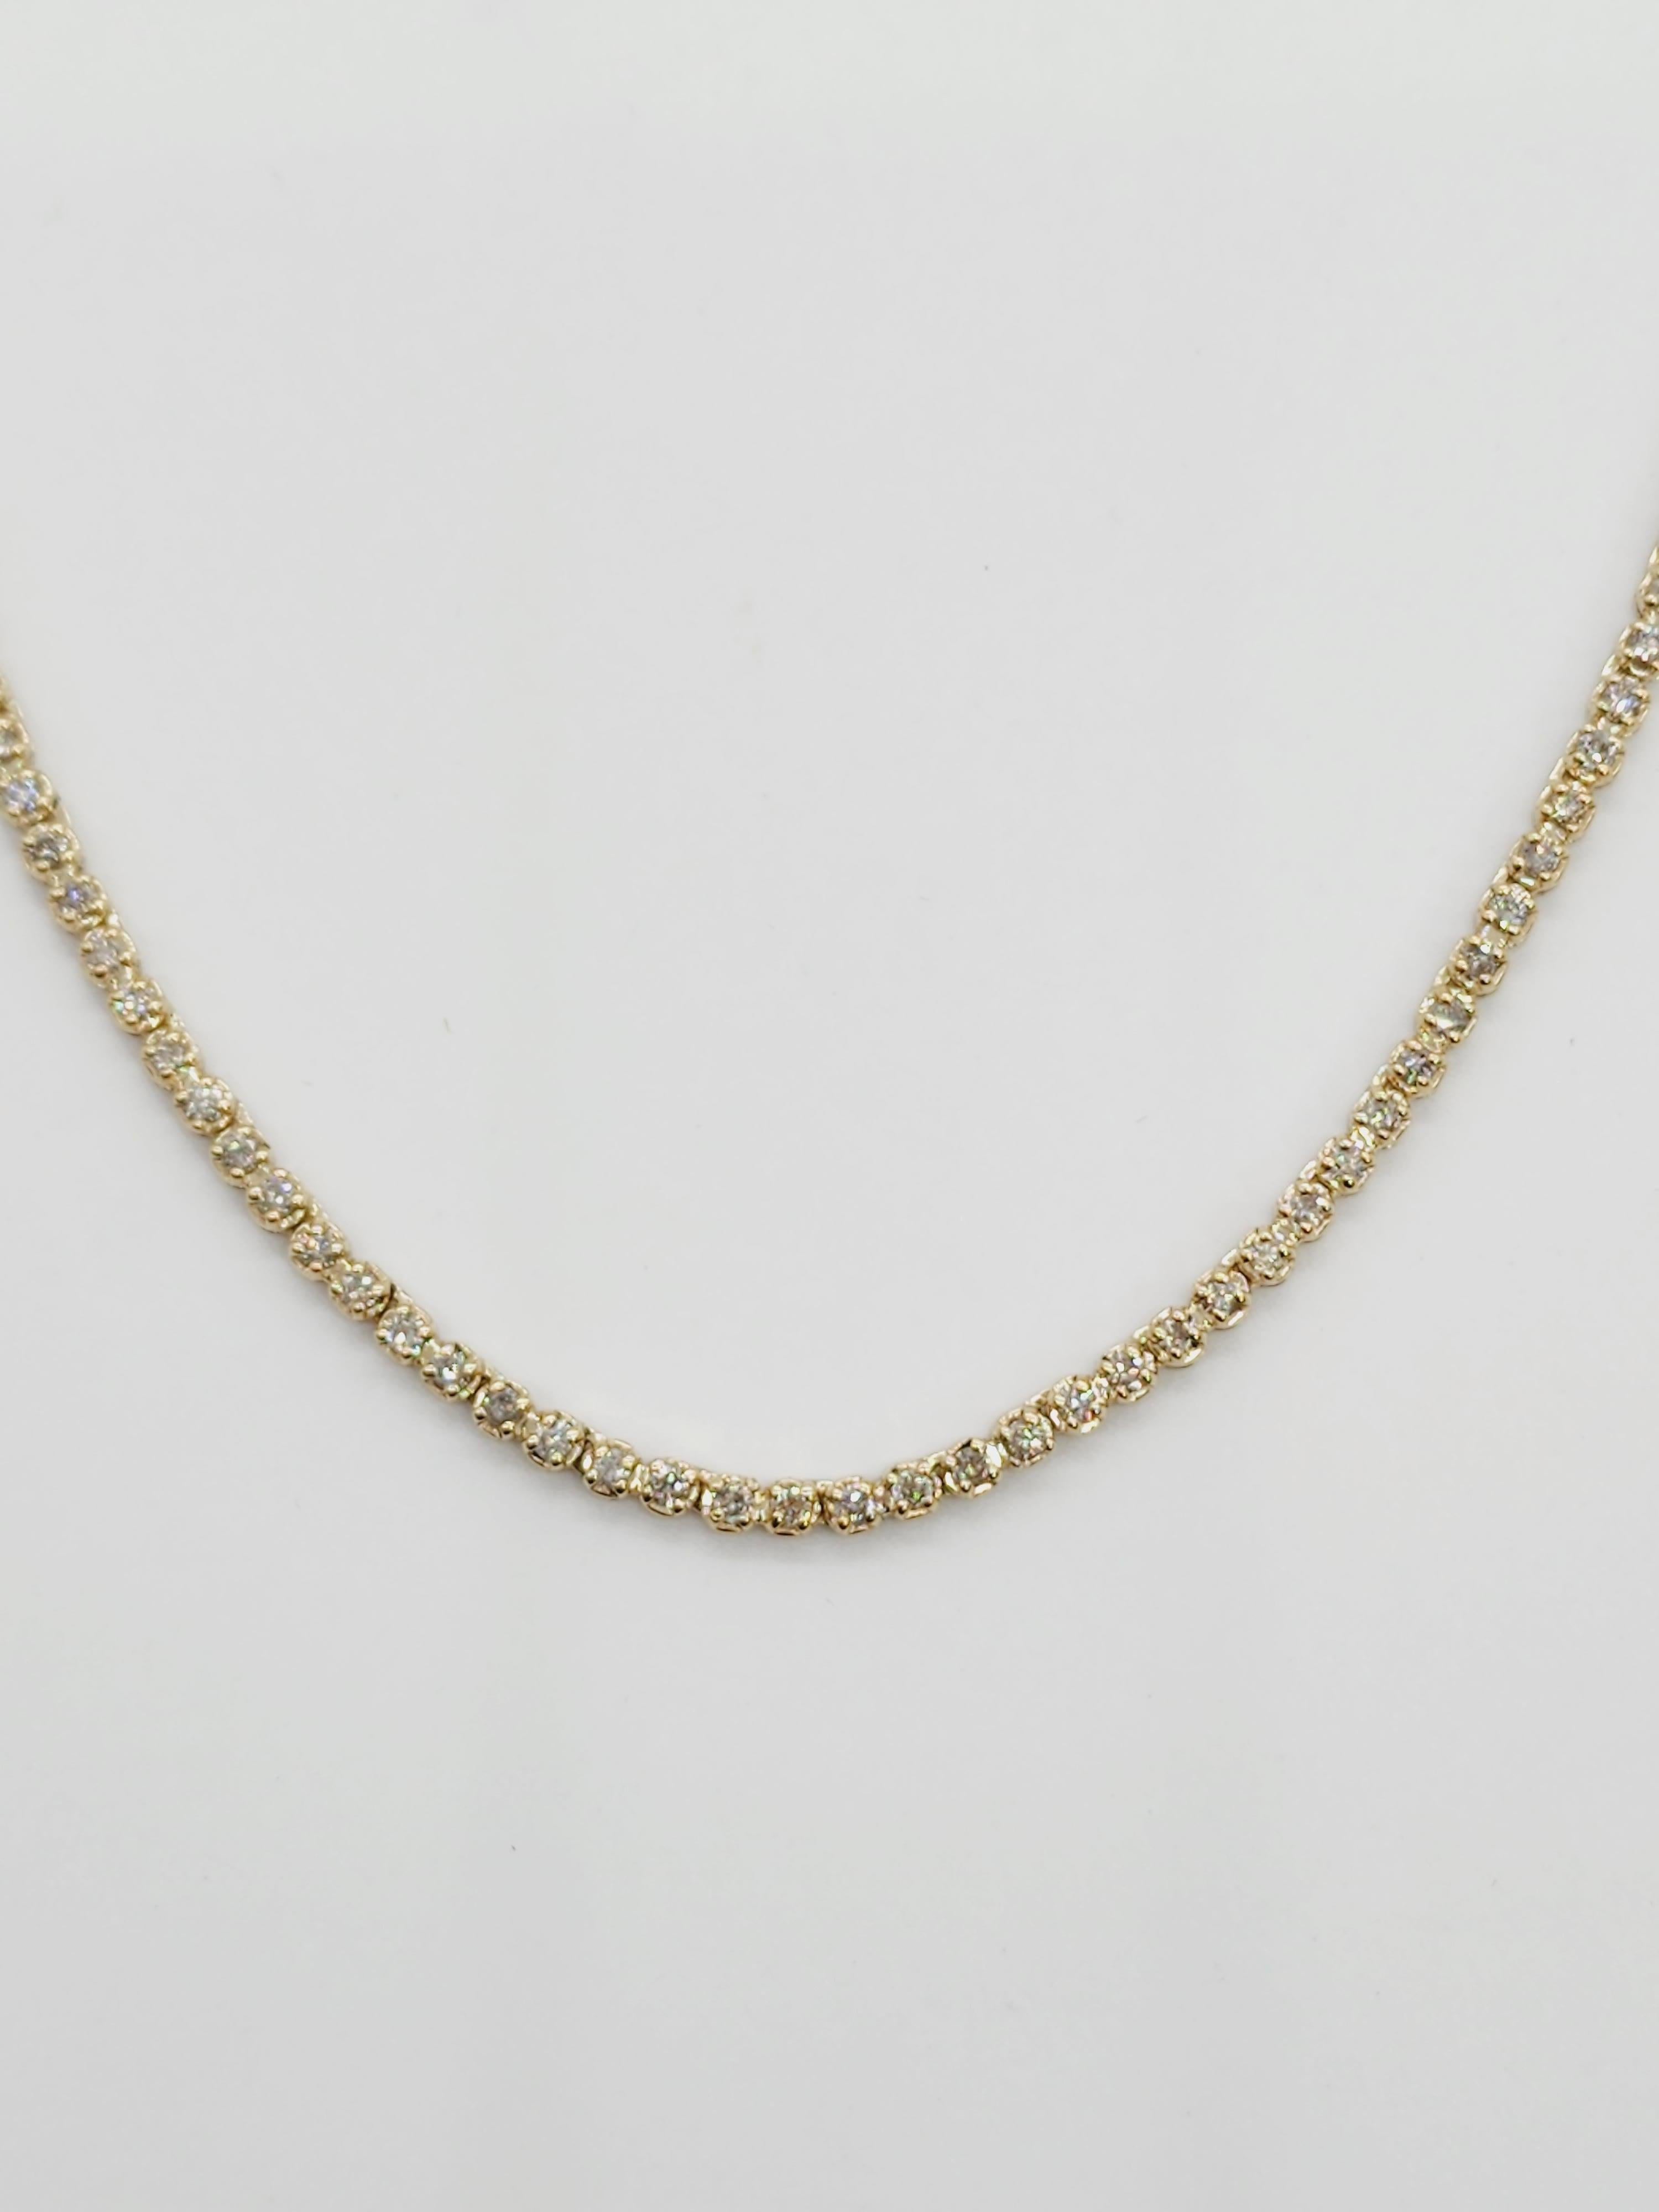 Brilliant and beautiful buttercup necklace, natural round-brilliant cut
14k yellow gold buttercup setting. 
20 inch length. Average I Color, SI Clarity.